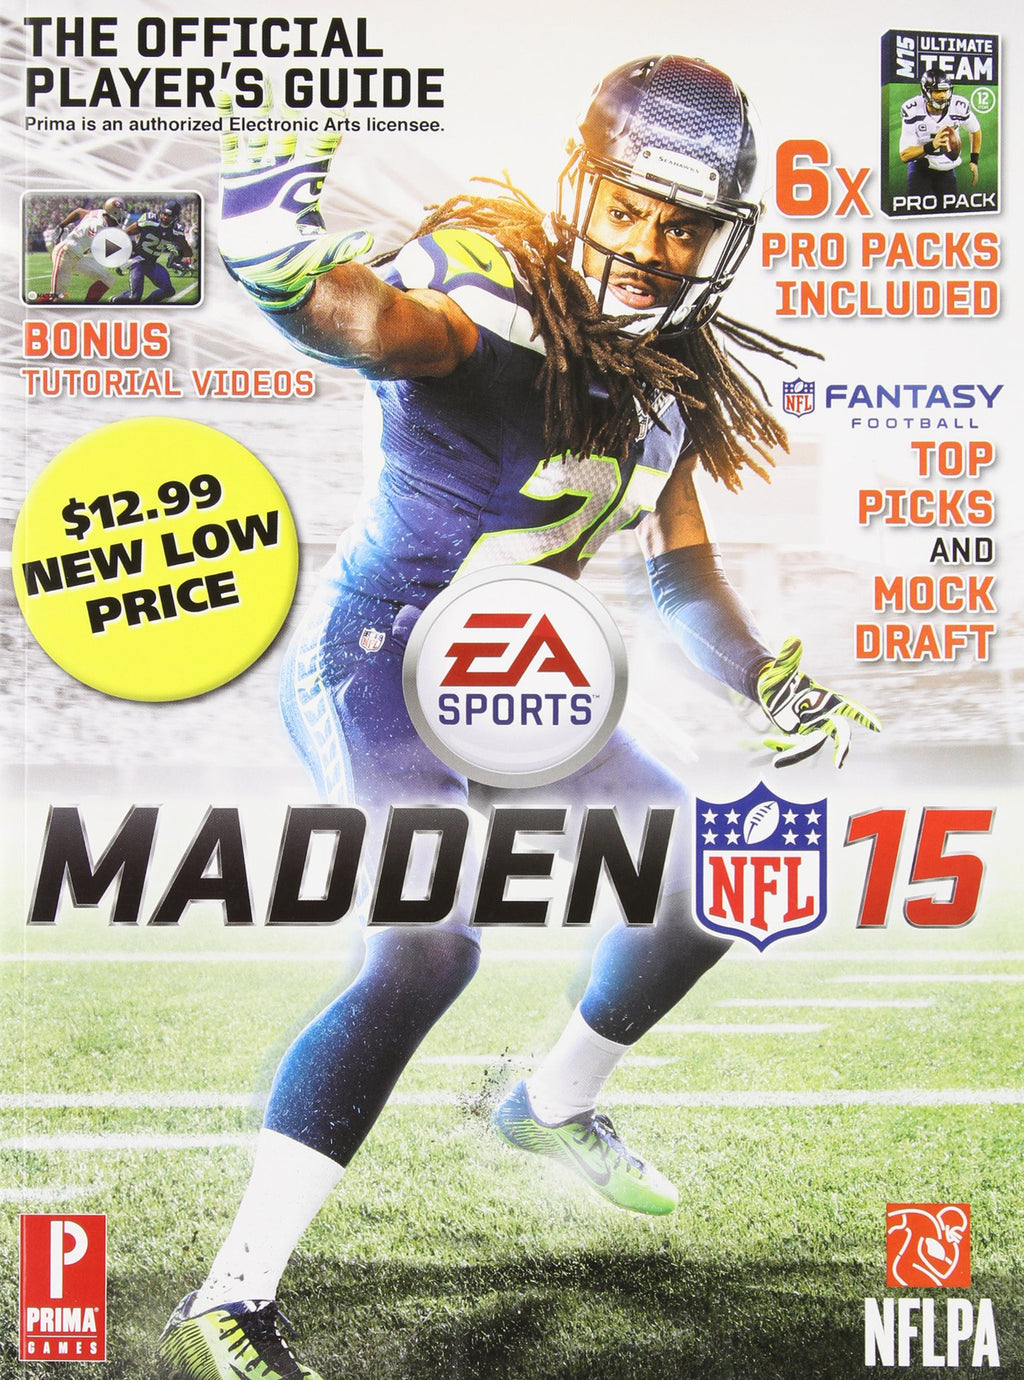 Madden NFL 15: The Official Player's Guide Paperback